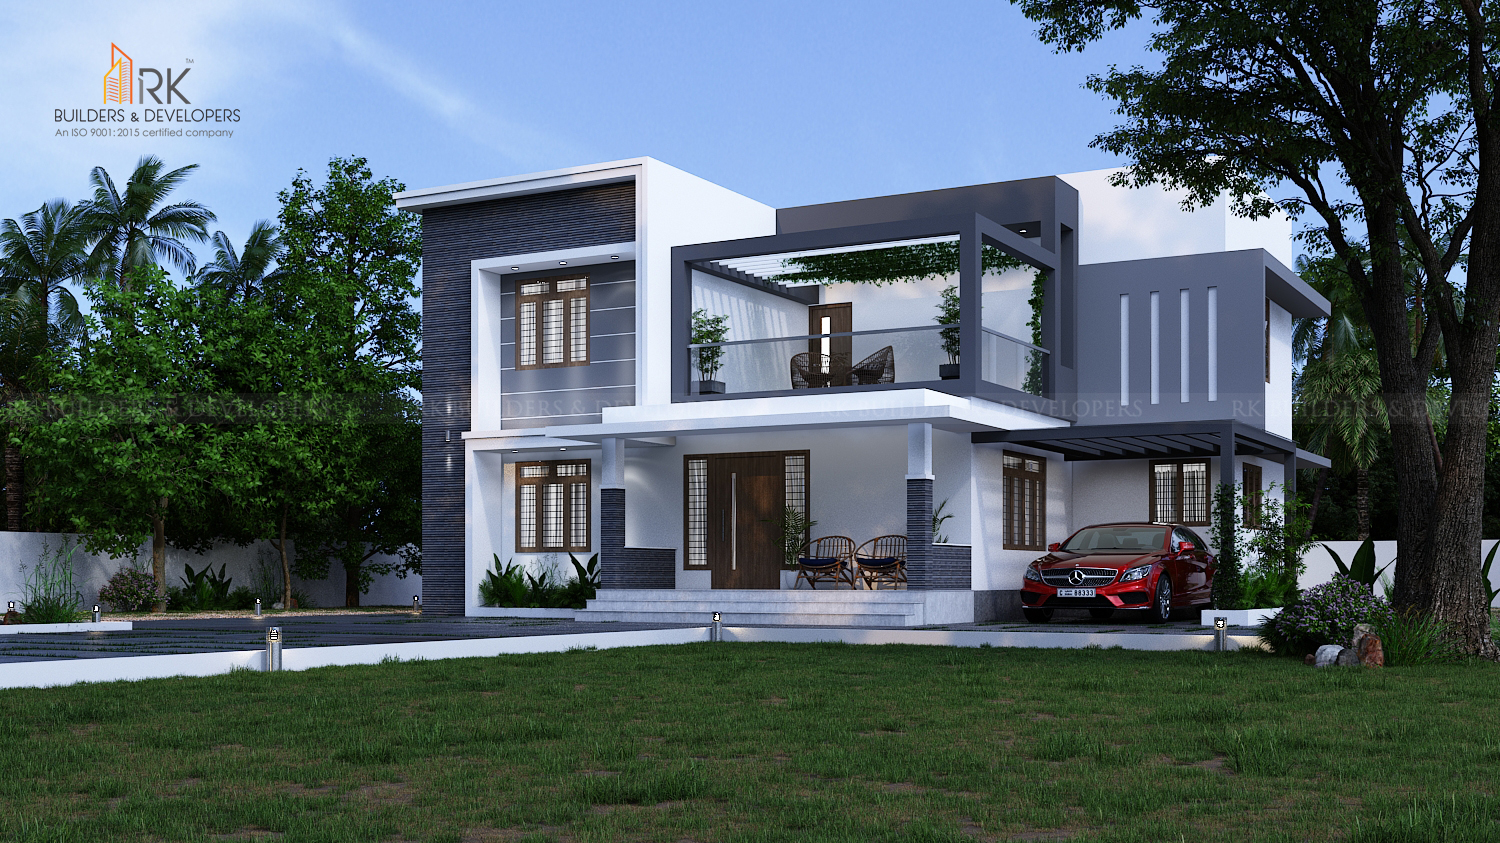 Construction Company in Thrissur